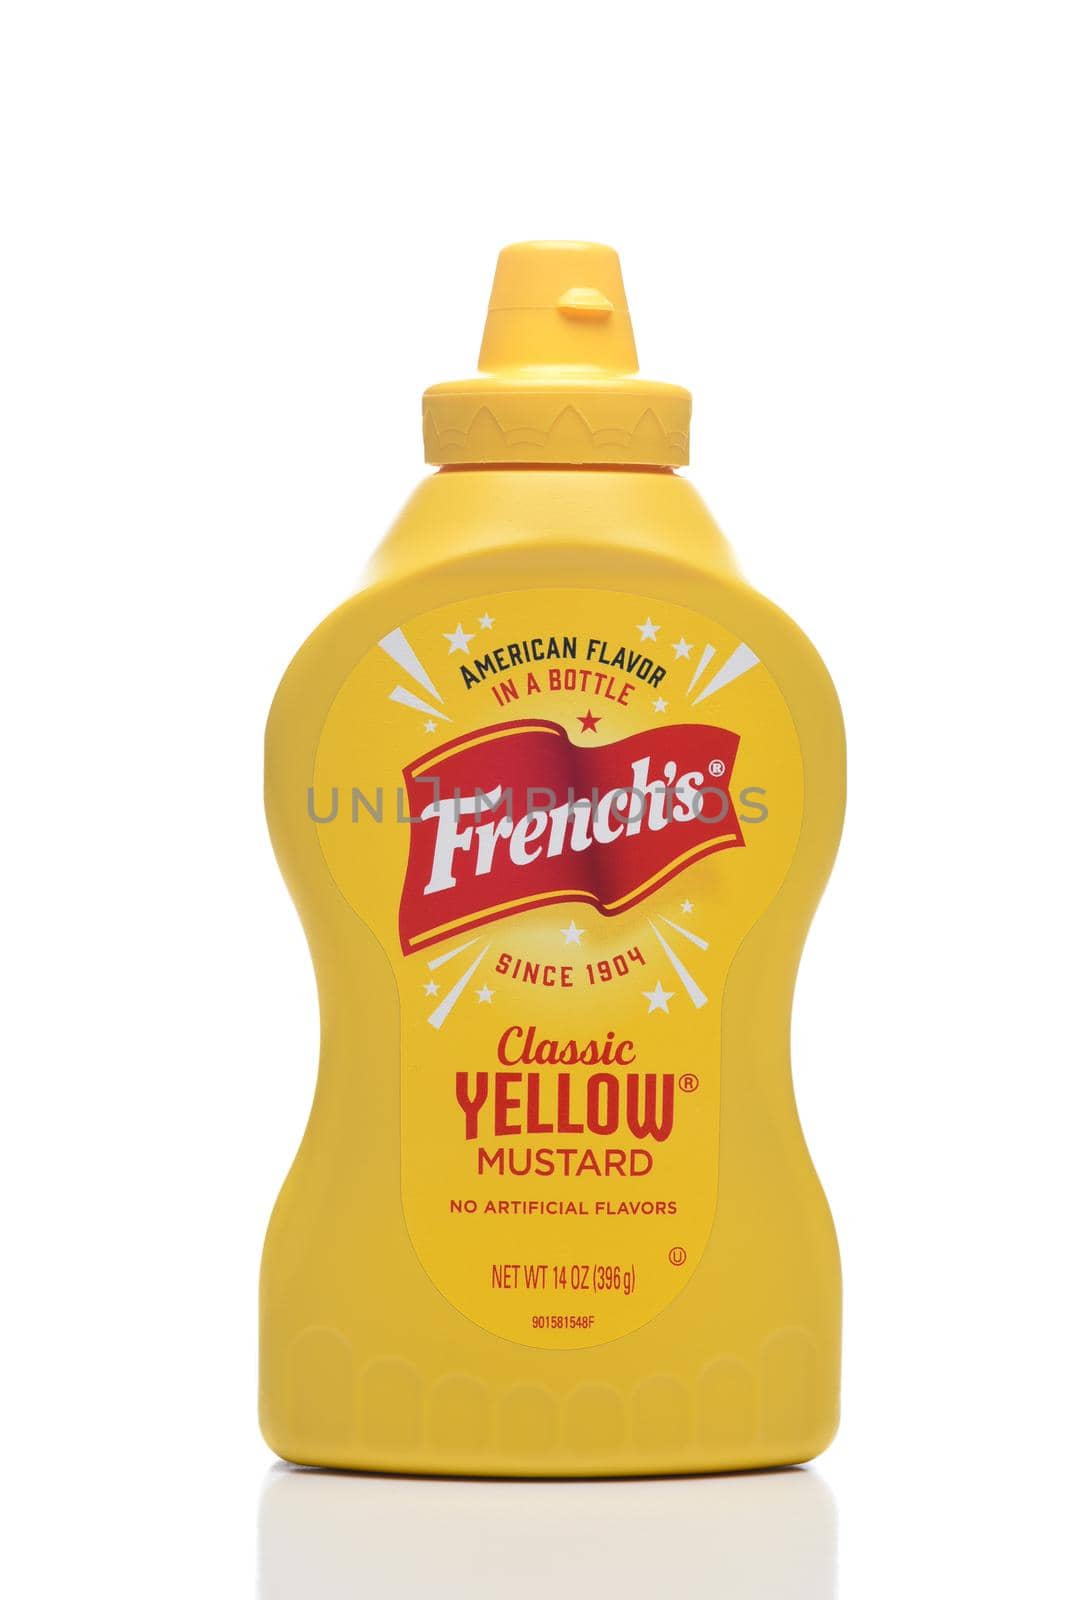 IRIVNE, CALIFORNIA - 4 JULY 2021: A 14 ounce bottle of Frenchs Classic Yellow Mustard.